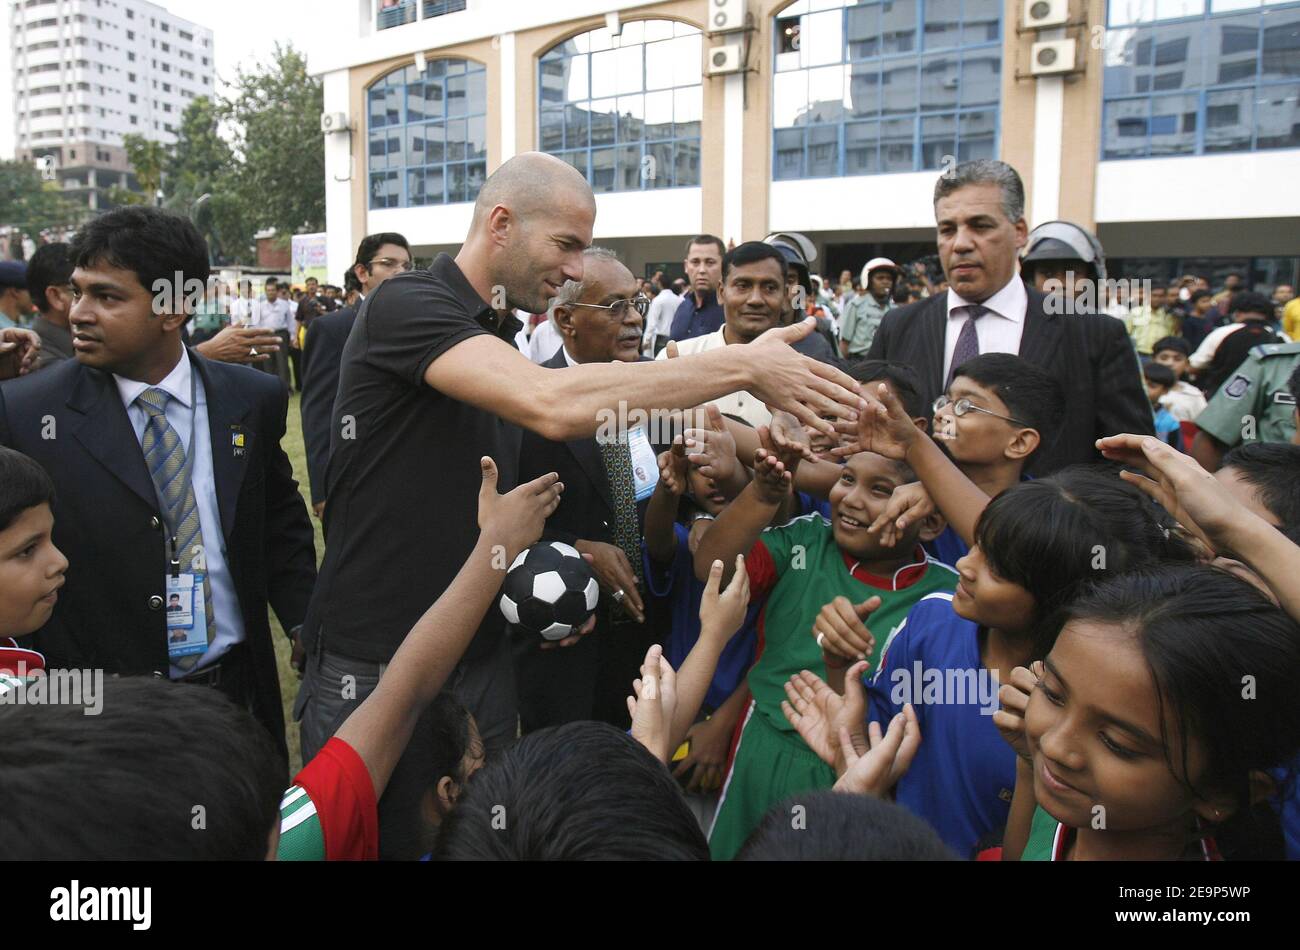 French soccer star Zinedine Zidane is surroundeed by young players at the Bangladesh football federation in Dhaka, Bangladesh on November 7, 2006. Zidane received a rousing welcome when he played football with children in a dusty Bangladeshi village. Photo by Patrick Durand/Cameleon/ABACAPRESS.COM Stock Photo